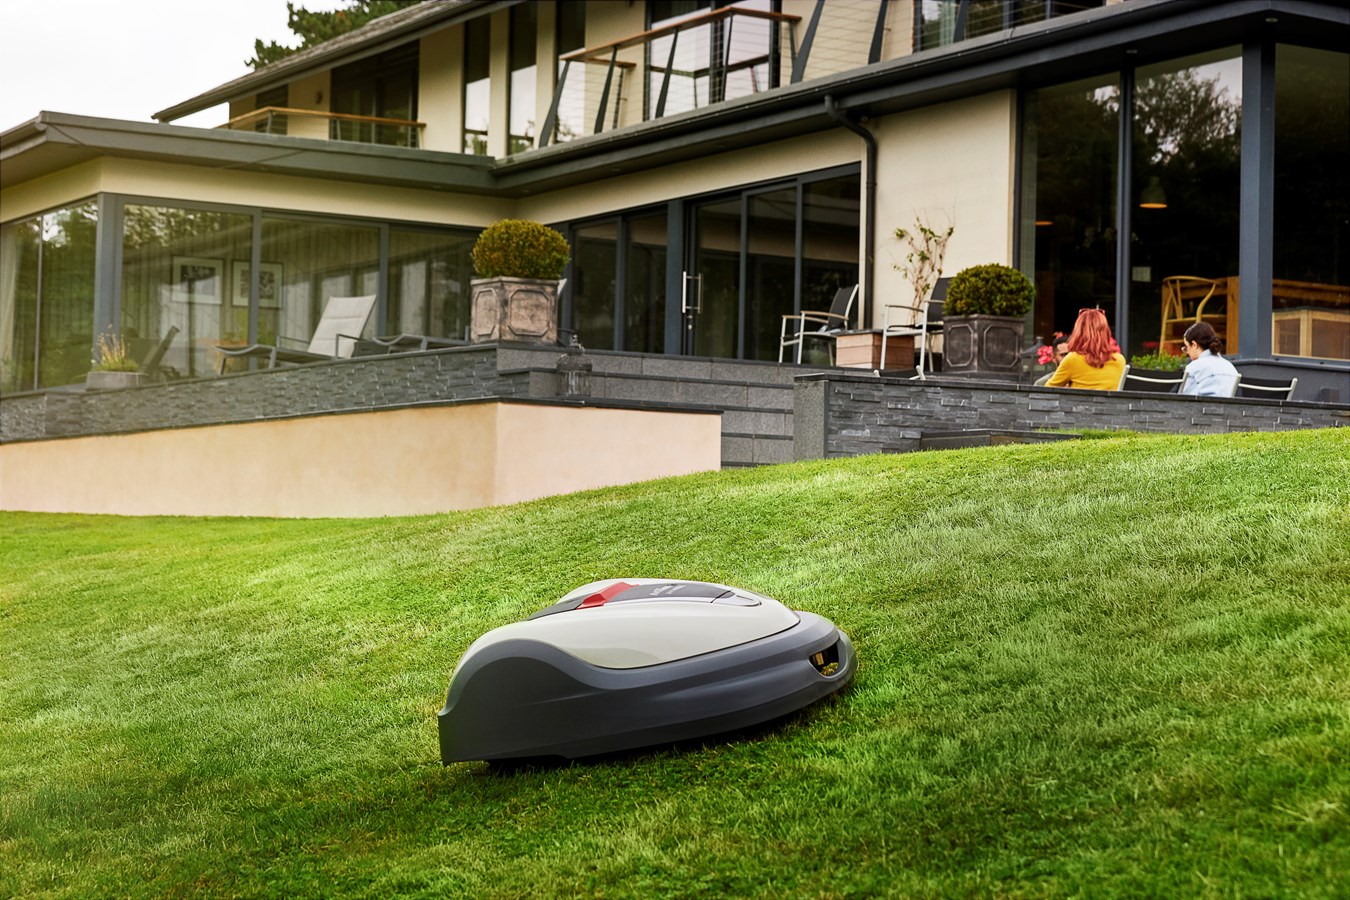 Honda announces a new, fully connected Live version of its HRM3000 robotic mower